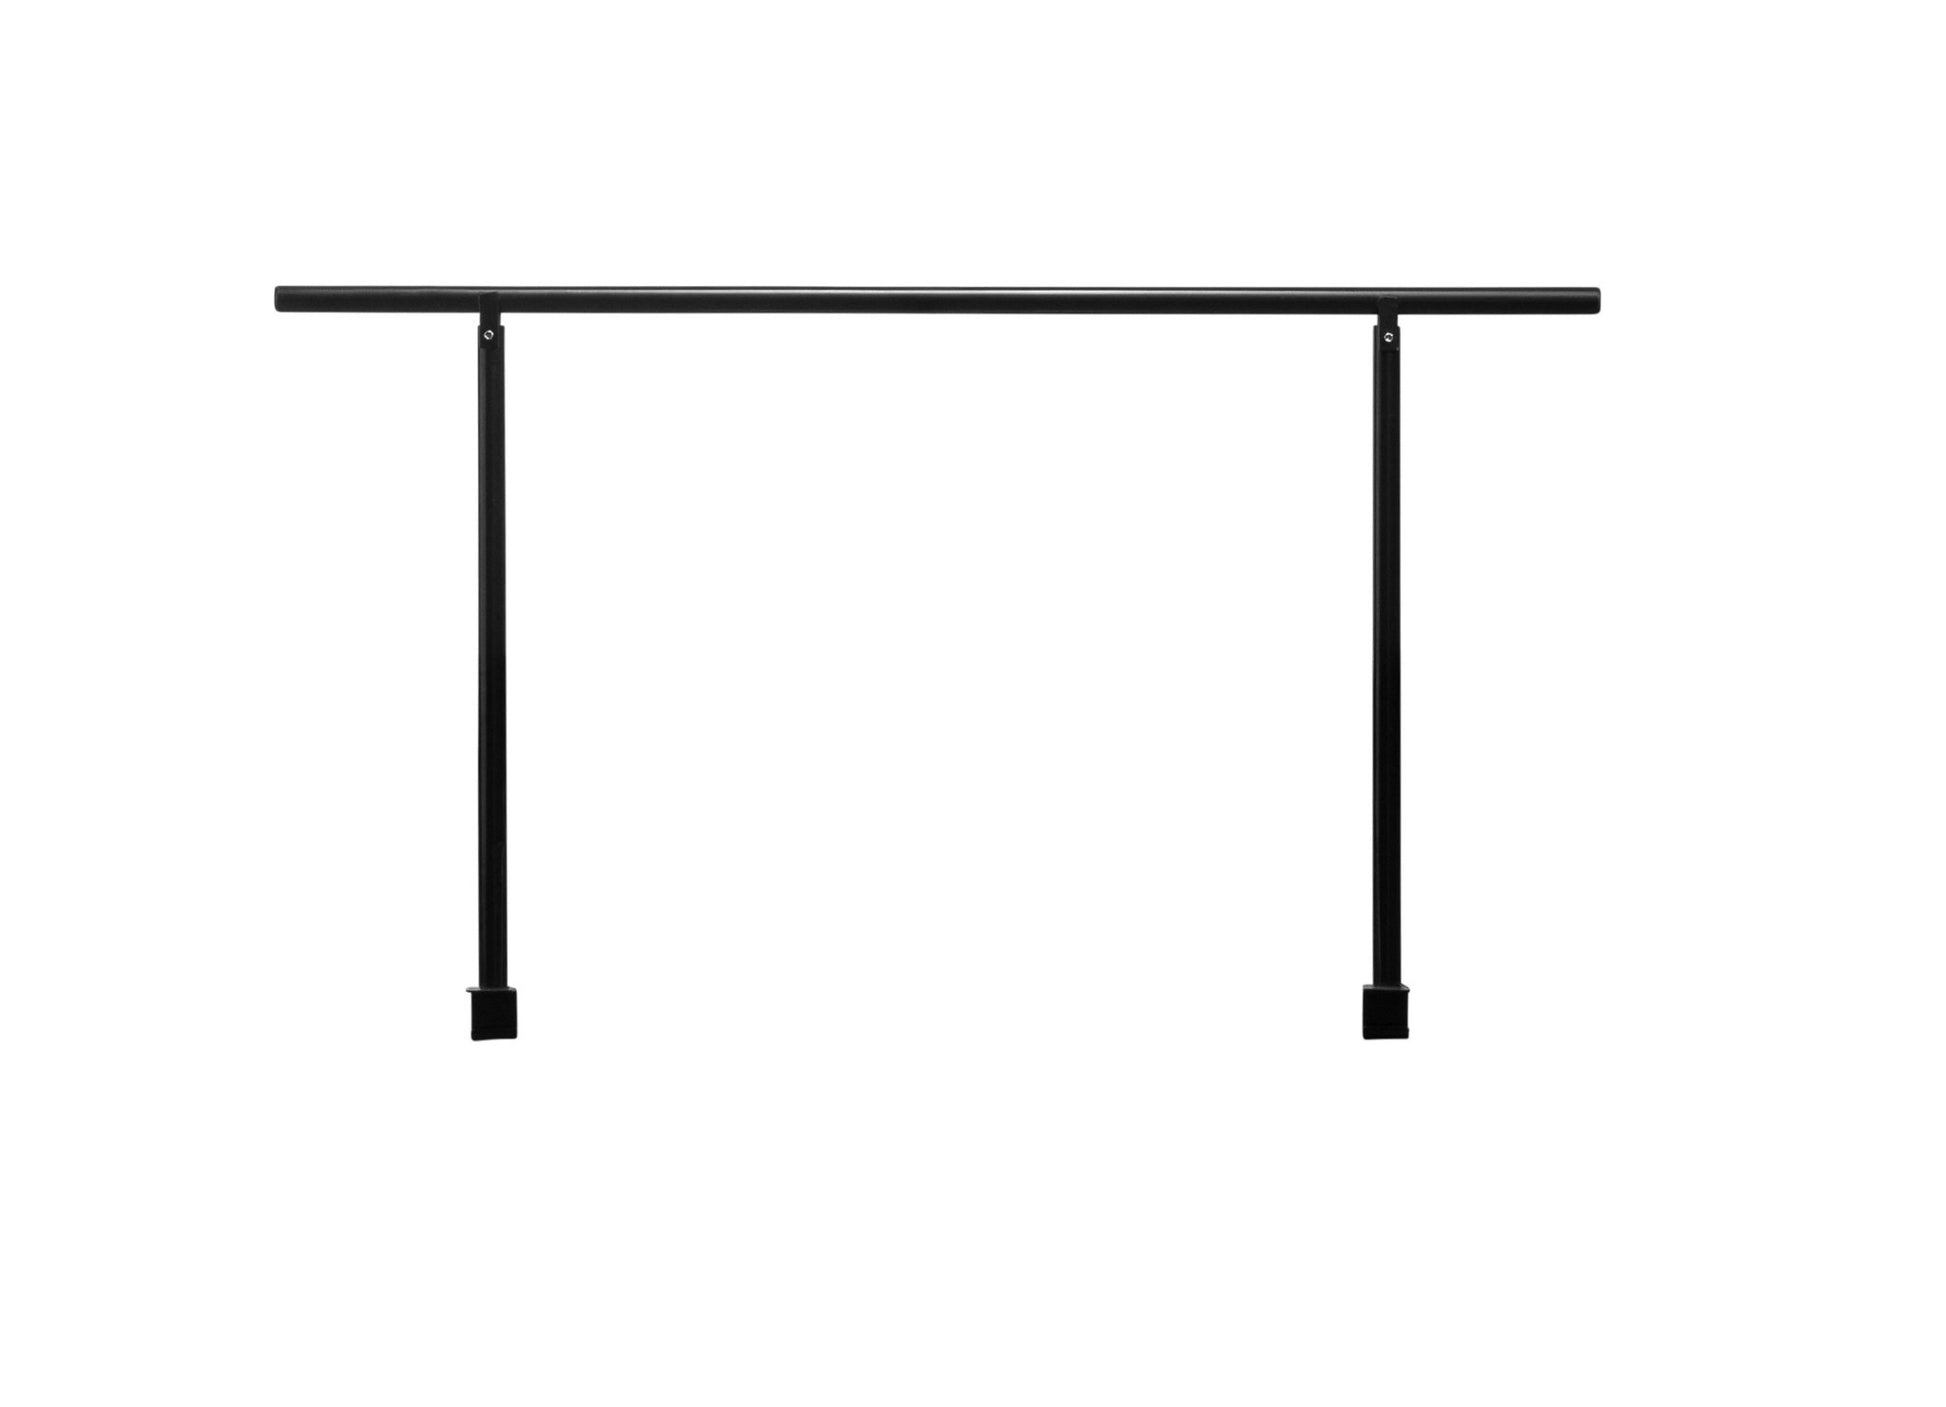 NPS Side Guard Rails for 3-Level Standing Risers - 4' 9 3/4" X 2' 6 7/8" (National Public Seating NPS-SGR3L) - SchoolOutlet